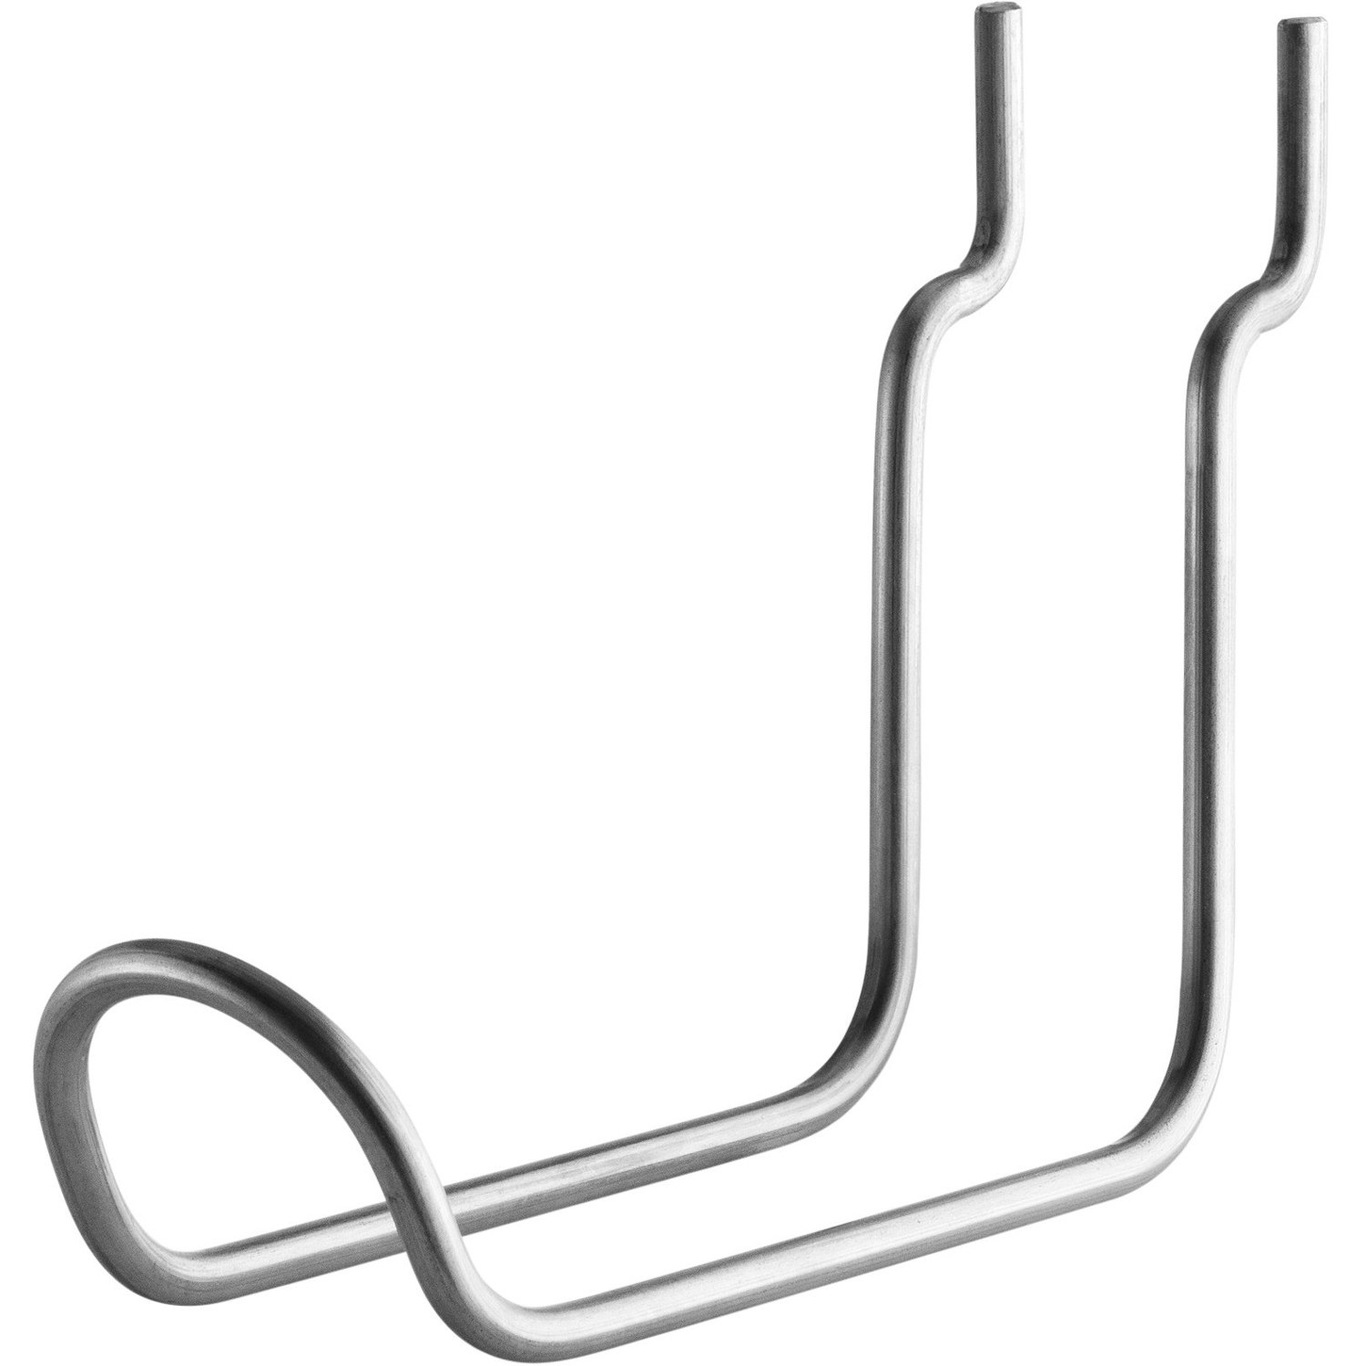 https://royaldesign.de/image/7/string-string-vertical-double-hook-stainless-2-pack-0?w=800&quality=80